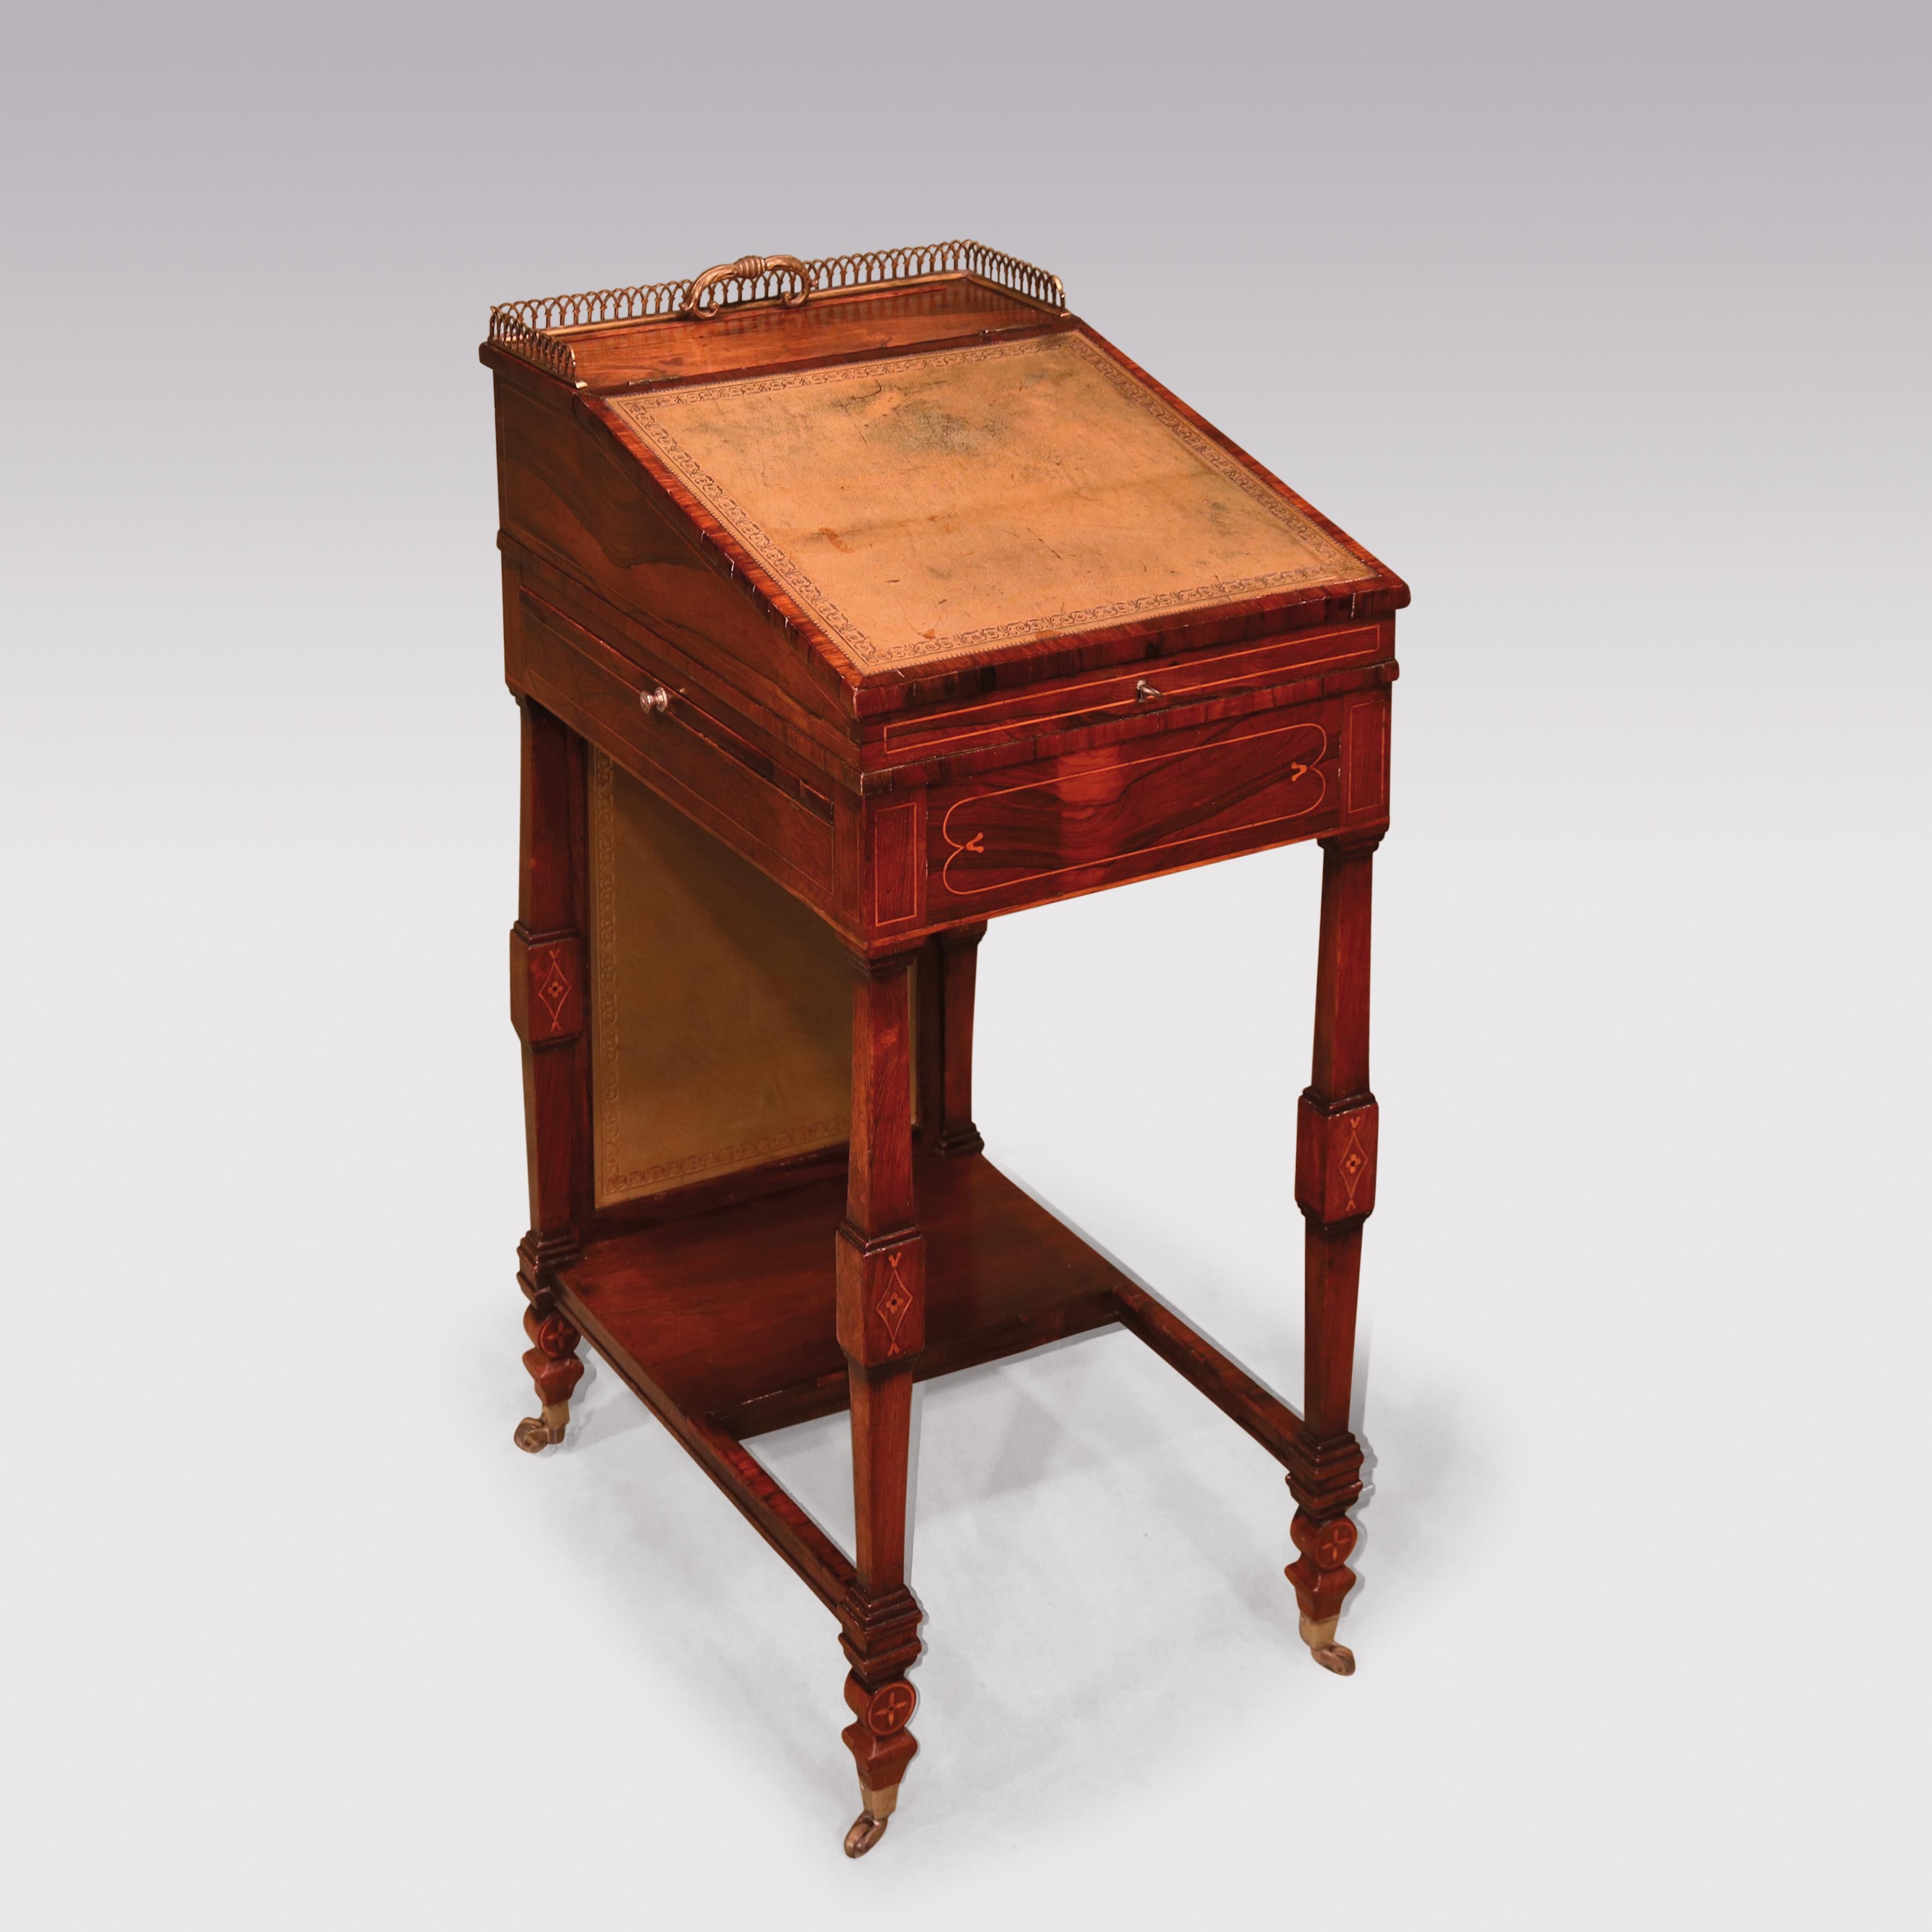 An attractive early 19th century Regency period rosewood freestanding 